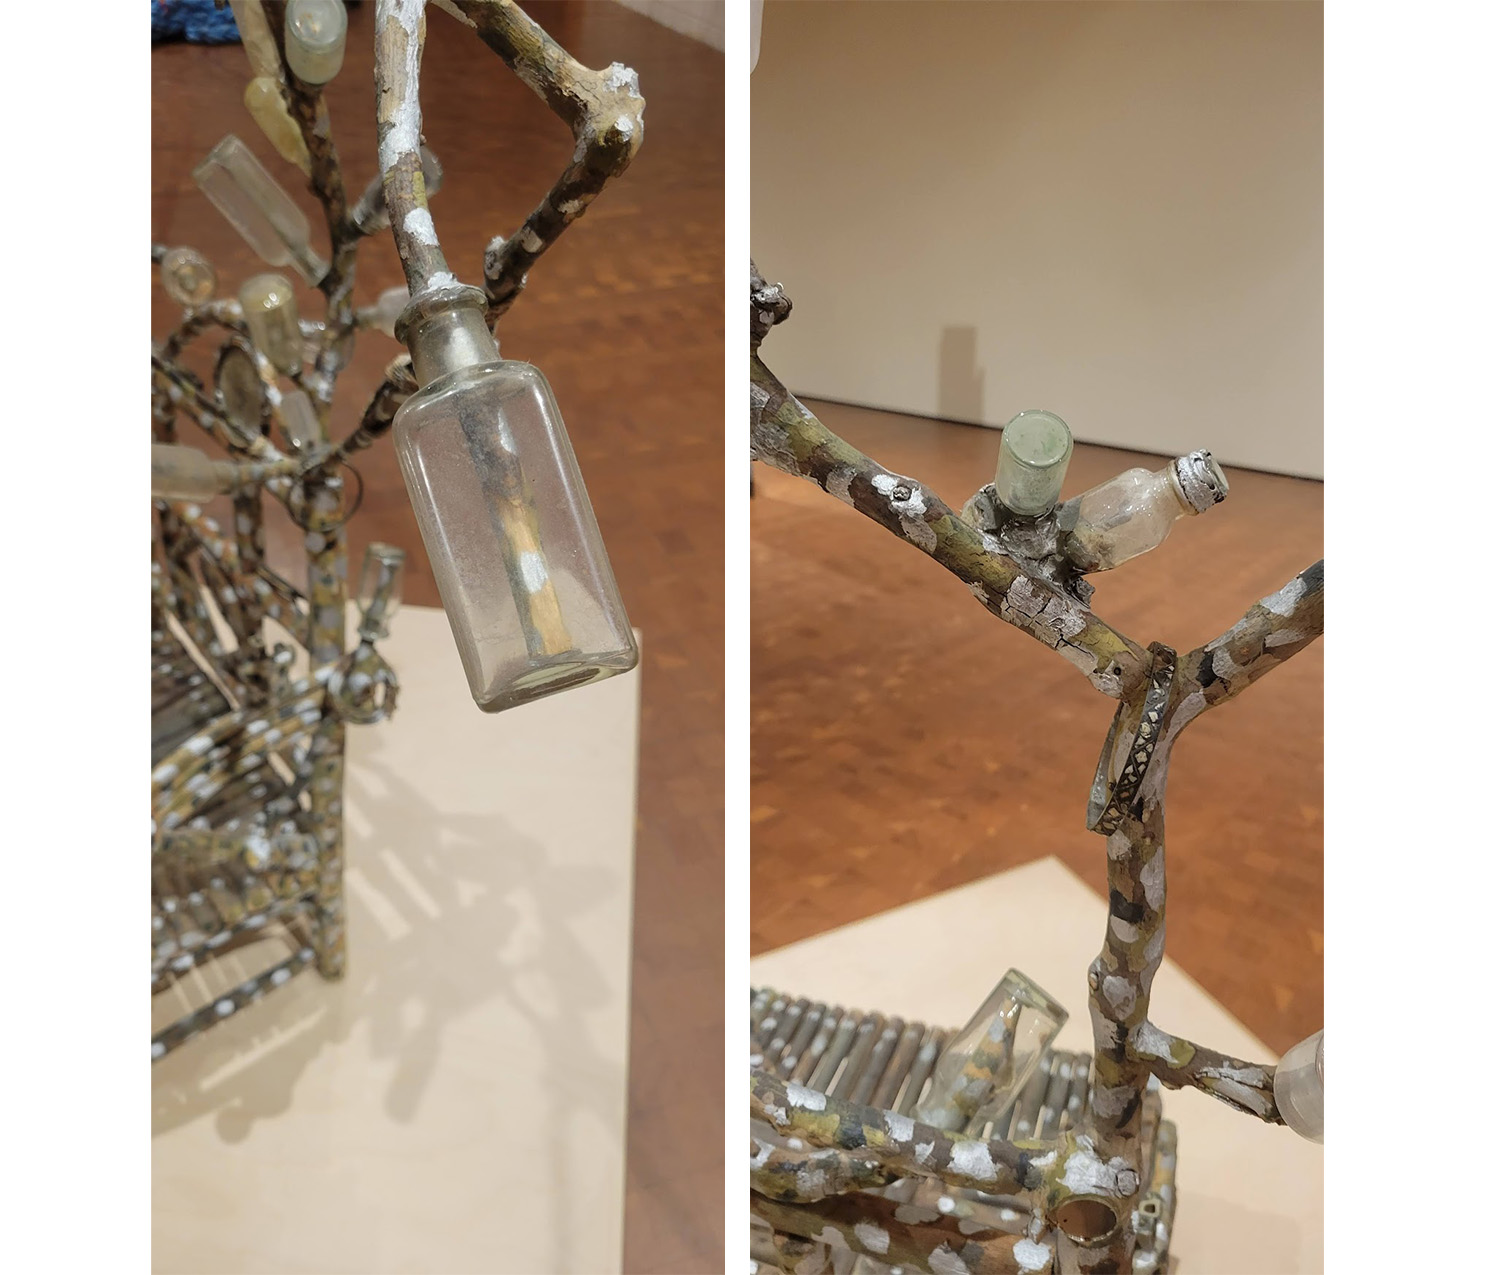 two photographs showing close-ups of a sculptural chair, with glass bottles dangling from tree branches adorned with scraps of metal